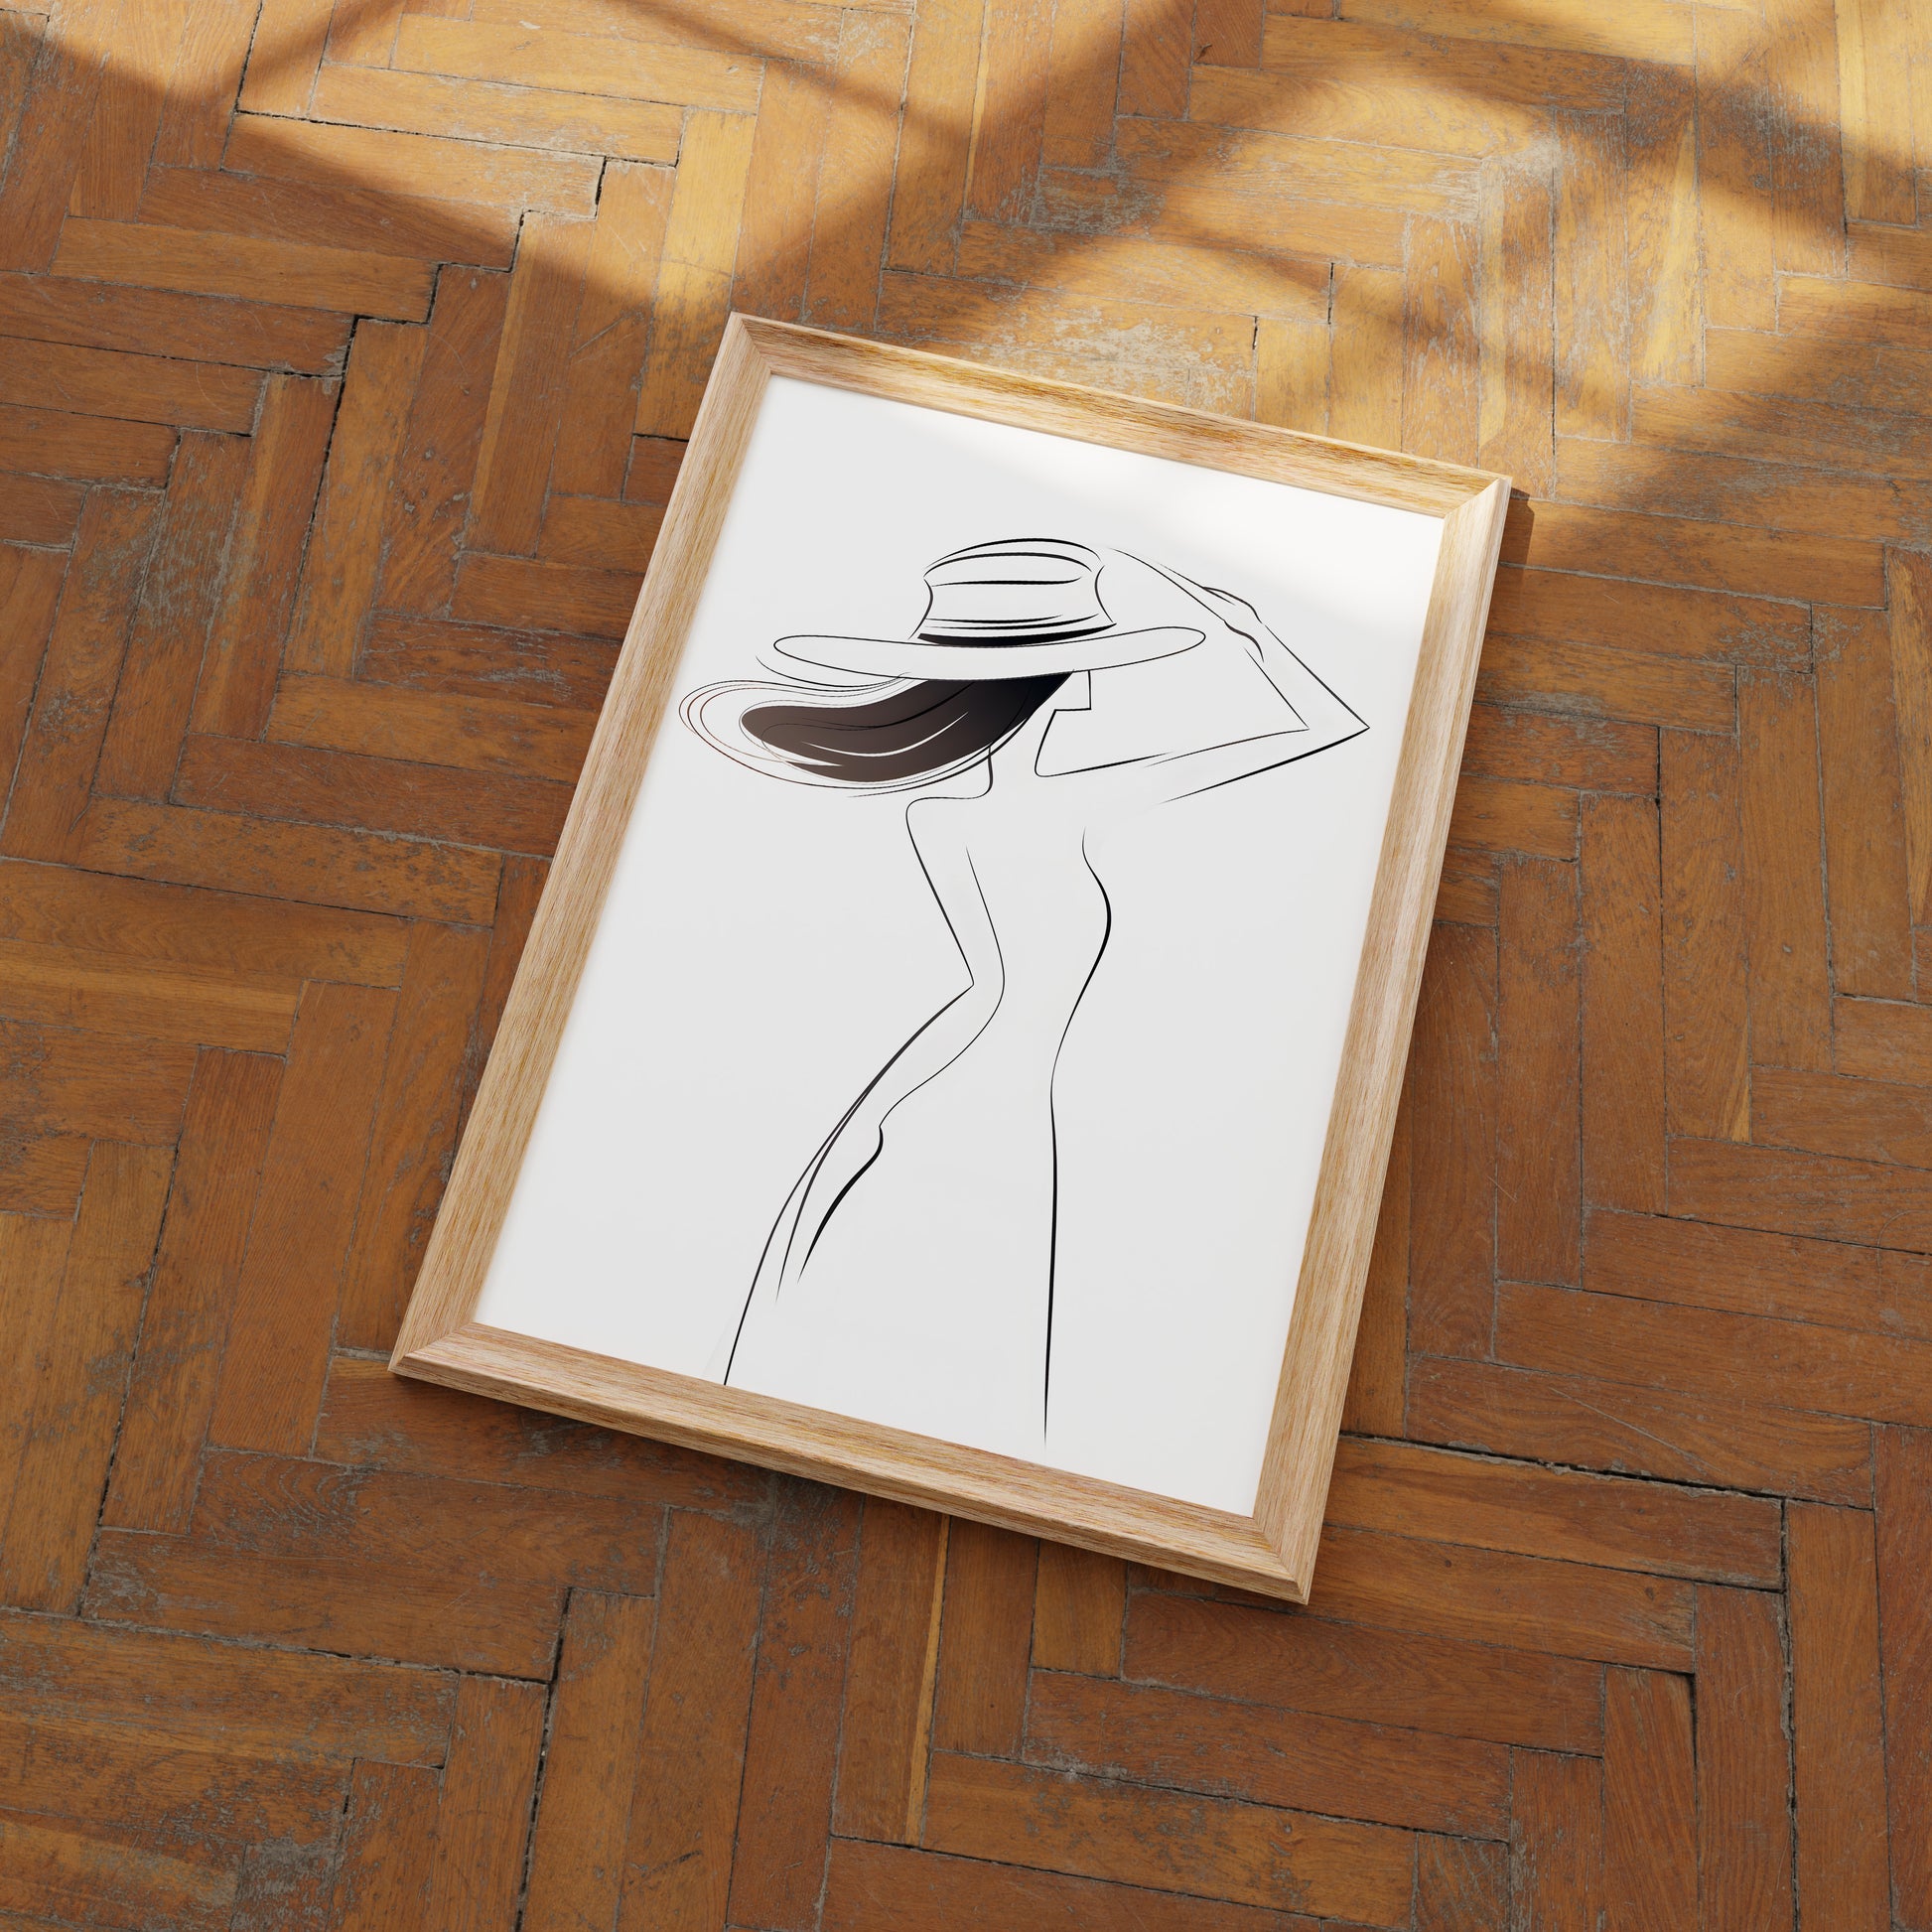 A minimalist framed sketch of a woman with a hat, displayed on a wooden floor.